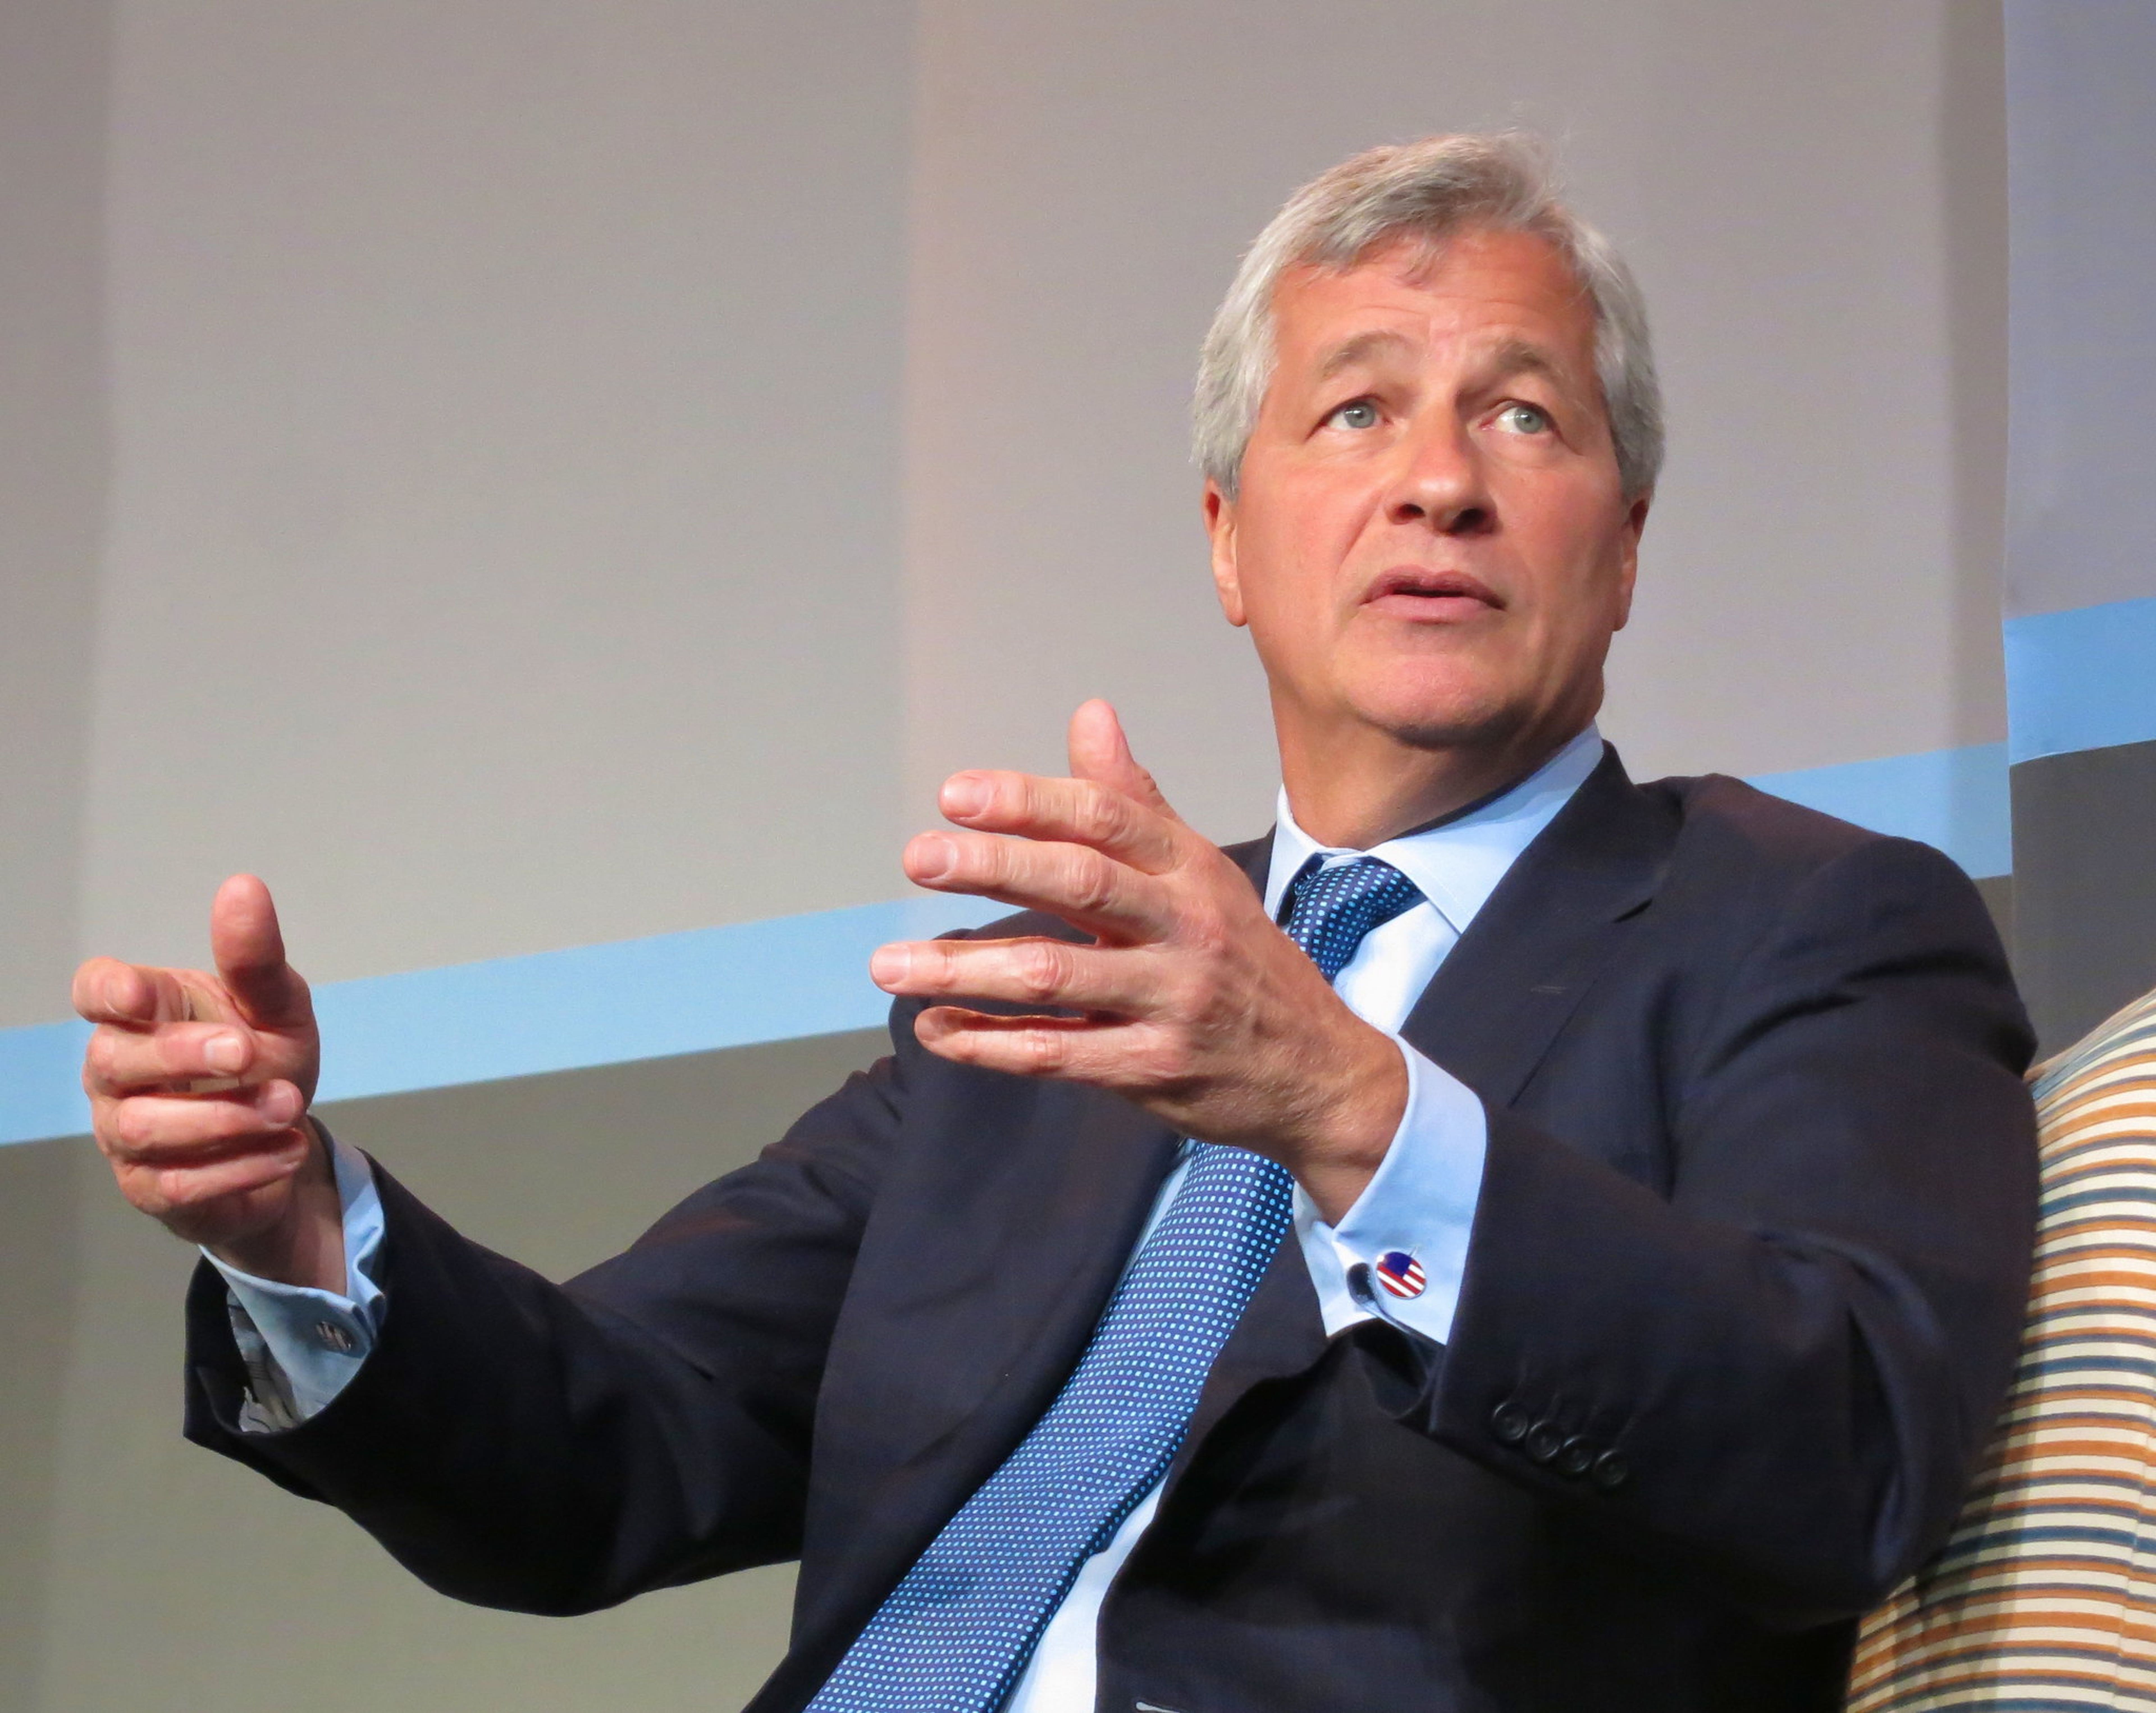 Jamie Dimon: &#39;The Fed Should Not Worry About Volatile Markets Unless They Affect The Actual Economy&#39;